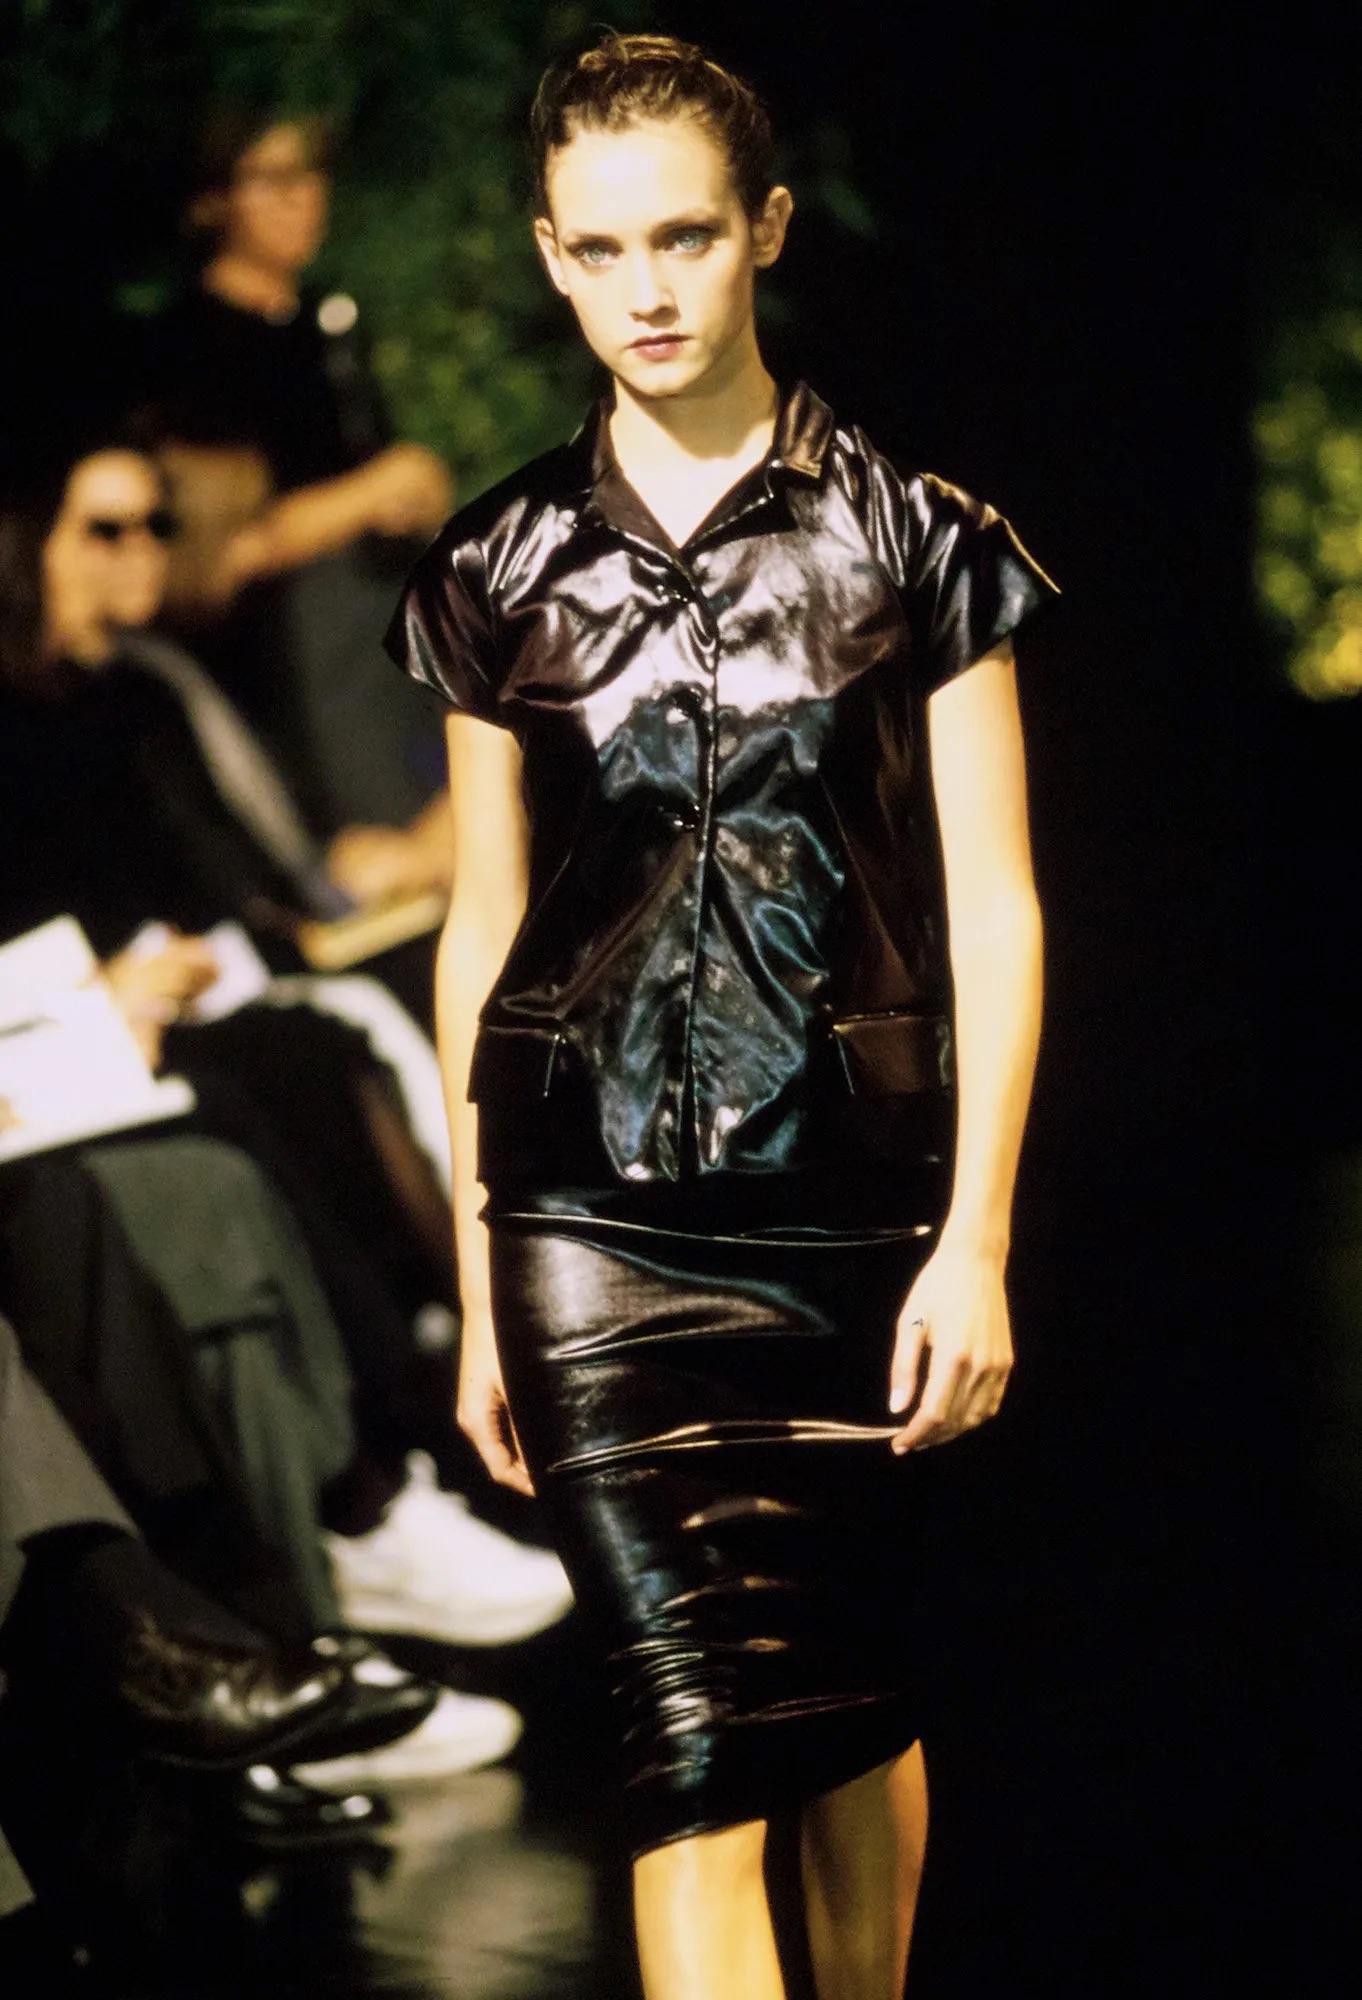 This fabulous black satiny Dolce & Gabbana short sleeve button-down top was featured in the Spring/Summer 1999 'Sicily Through the Internet' collection. It debuted on the season's runway as part of look 33, worn by model Lida Egorova. This